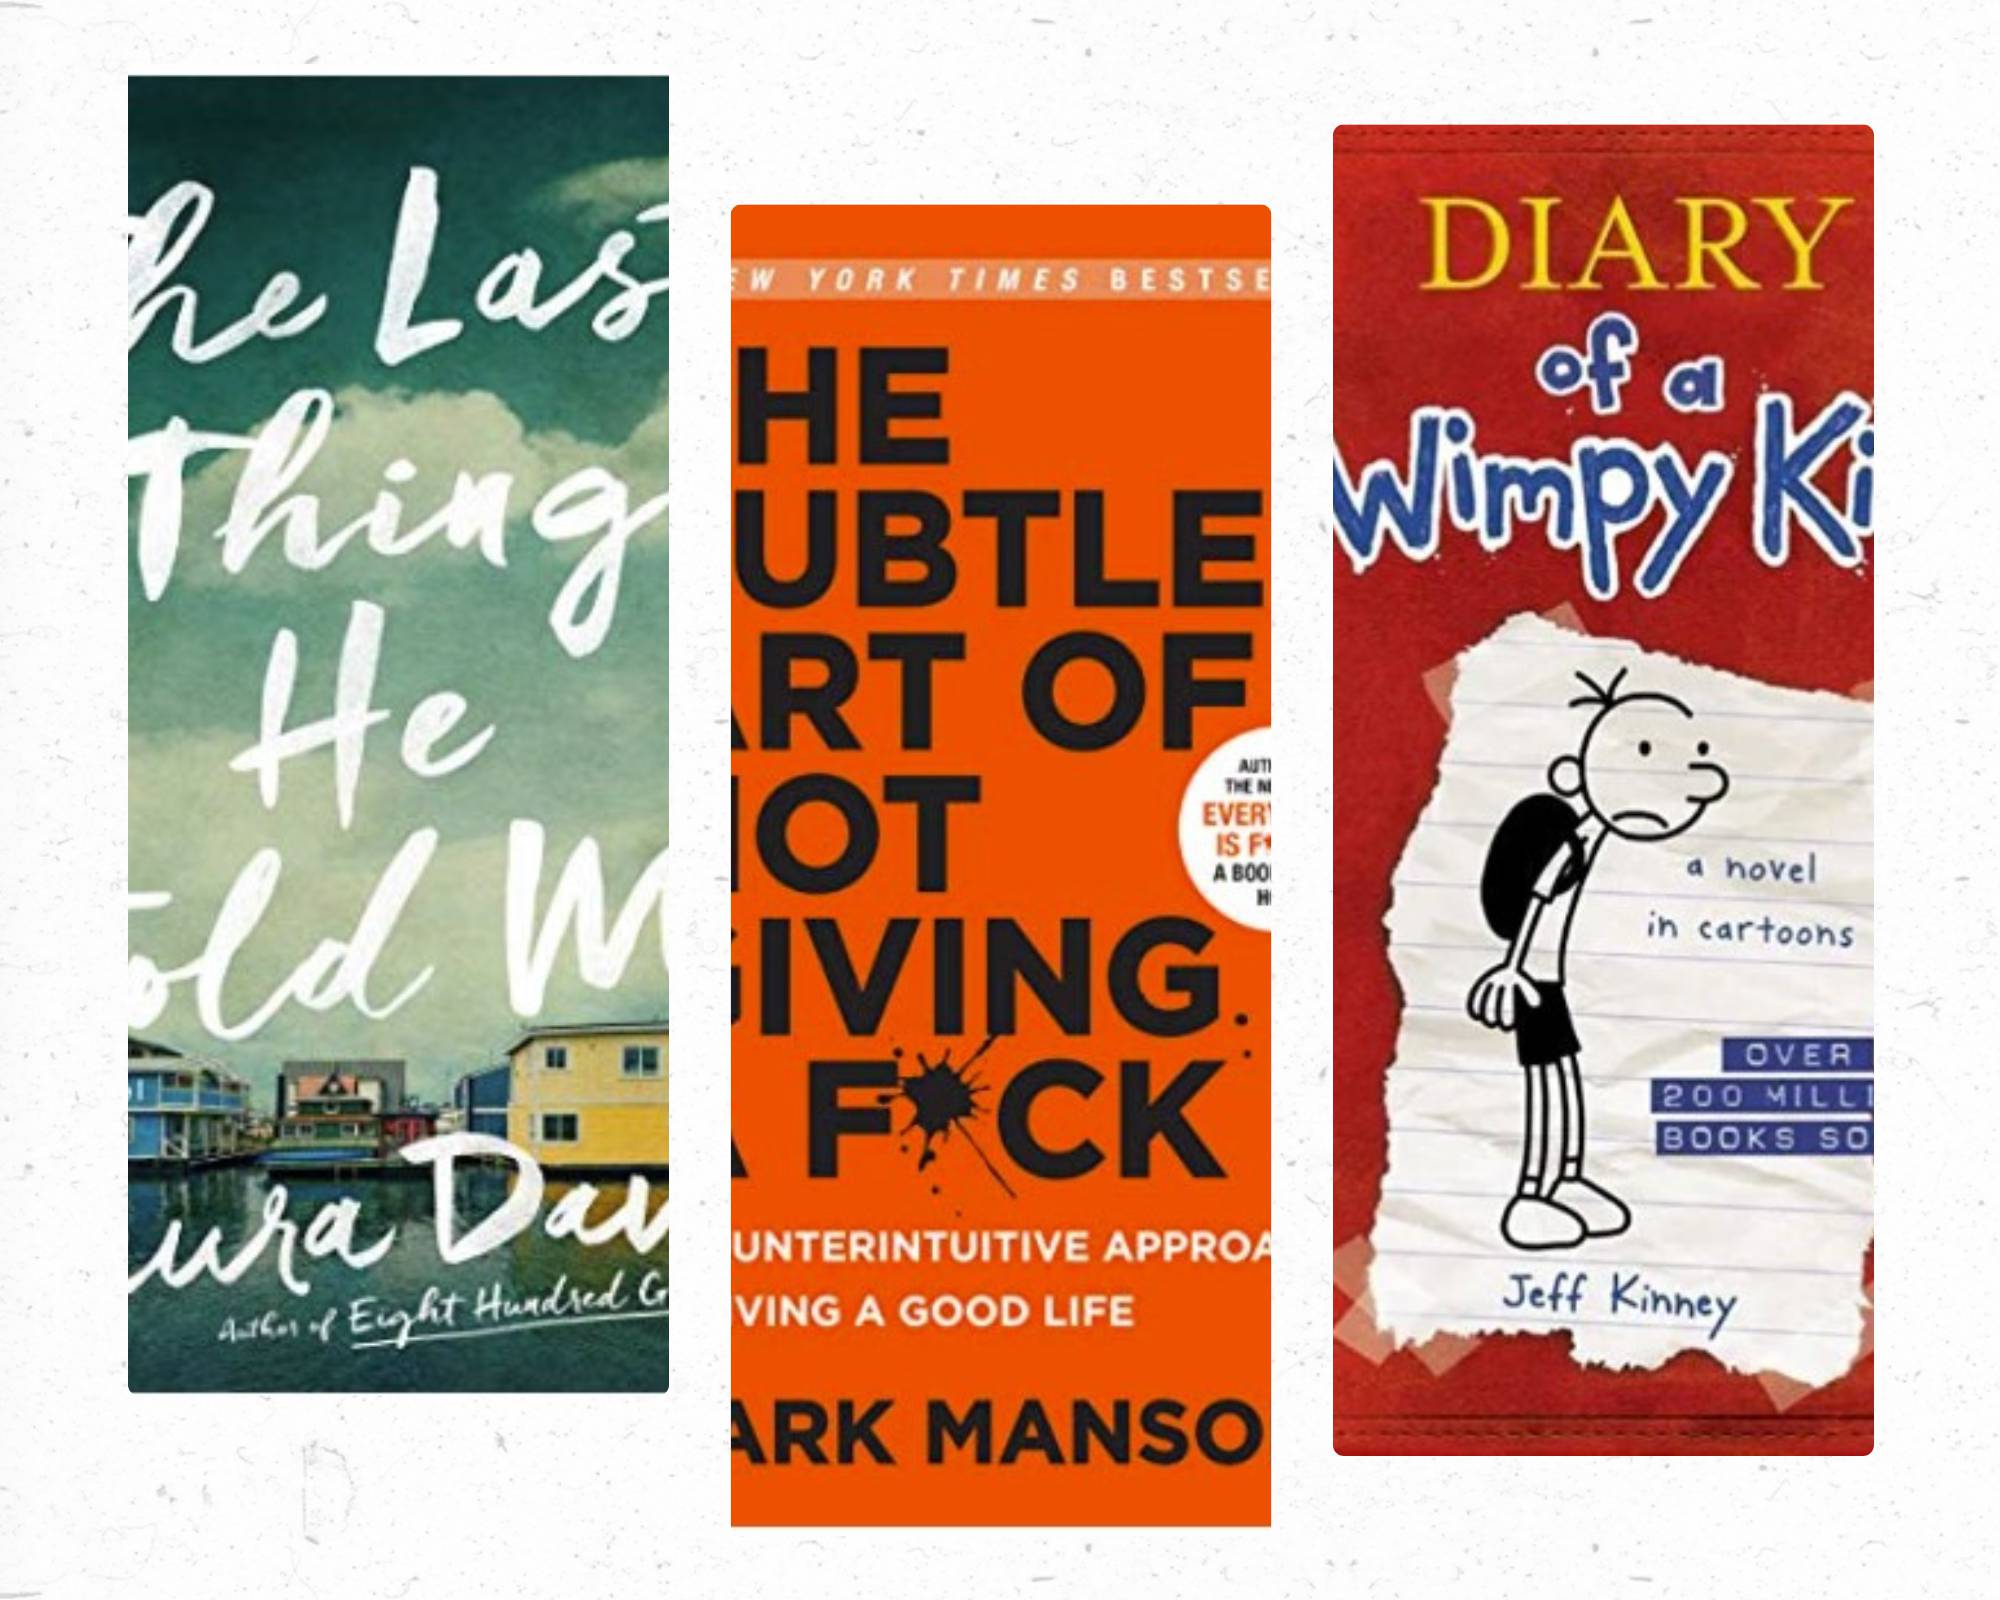 The top three best read books at the Anne Arundel County Public Library were, from left, "The Last Thing He Told Me," "The Subtle Art of Not Giving a F*ck," and "Diary of a Wimpy Kid."